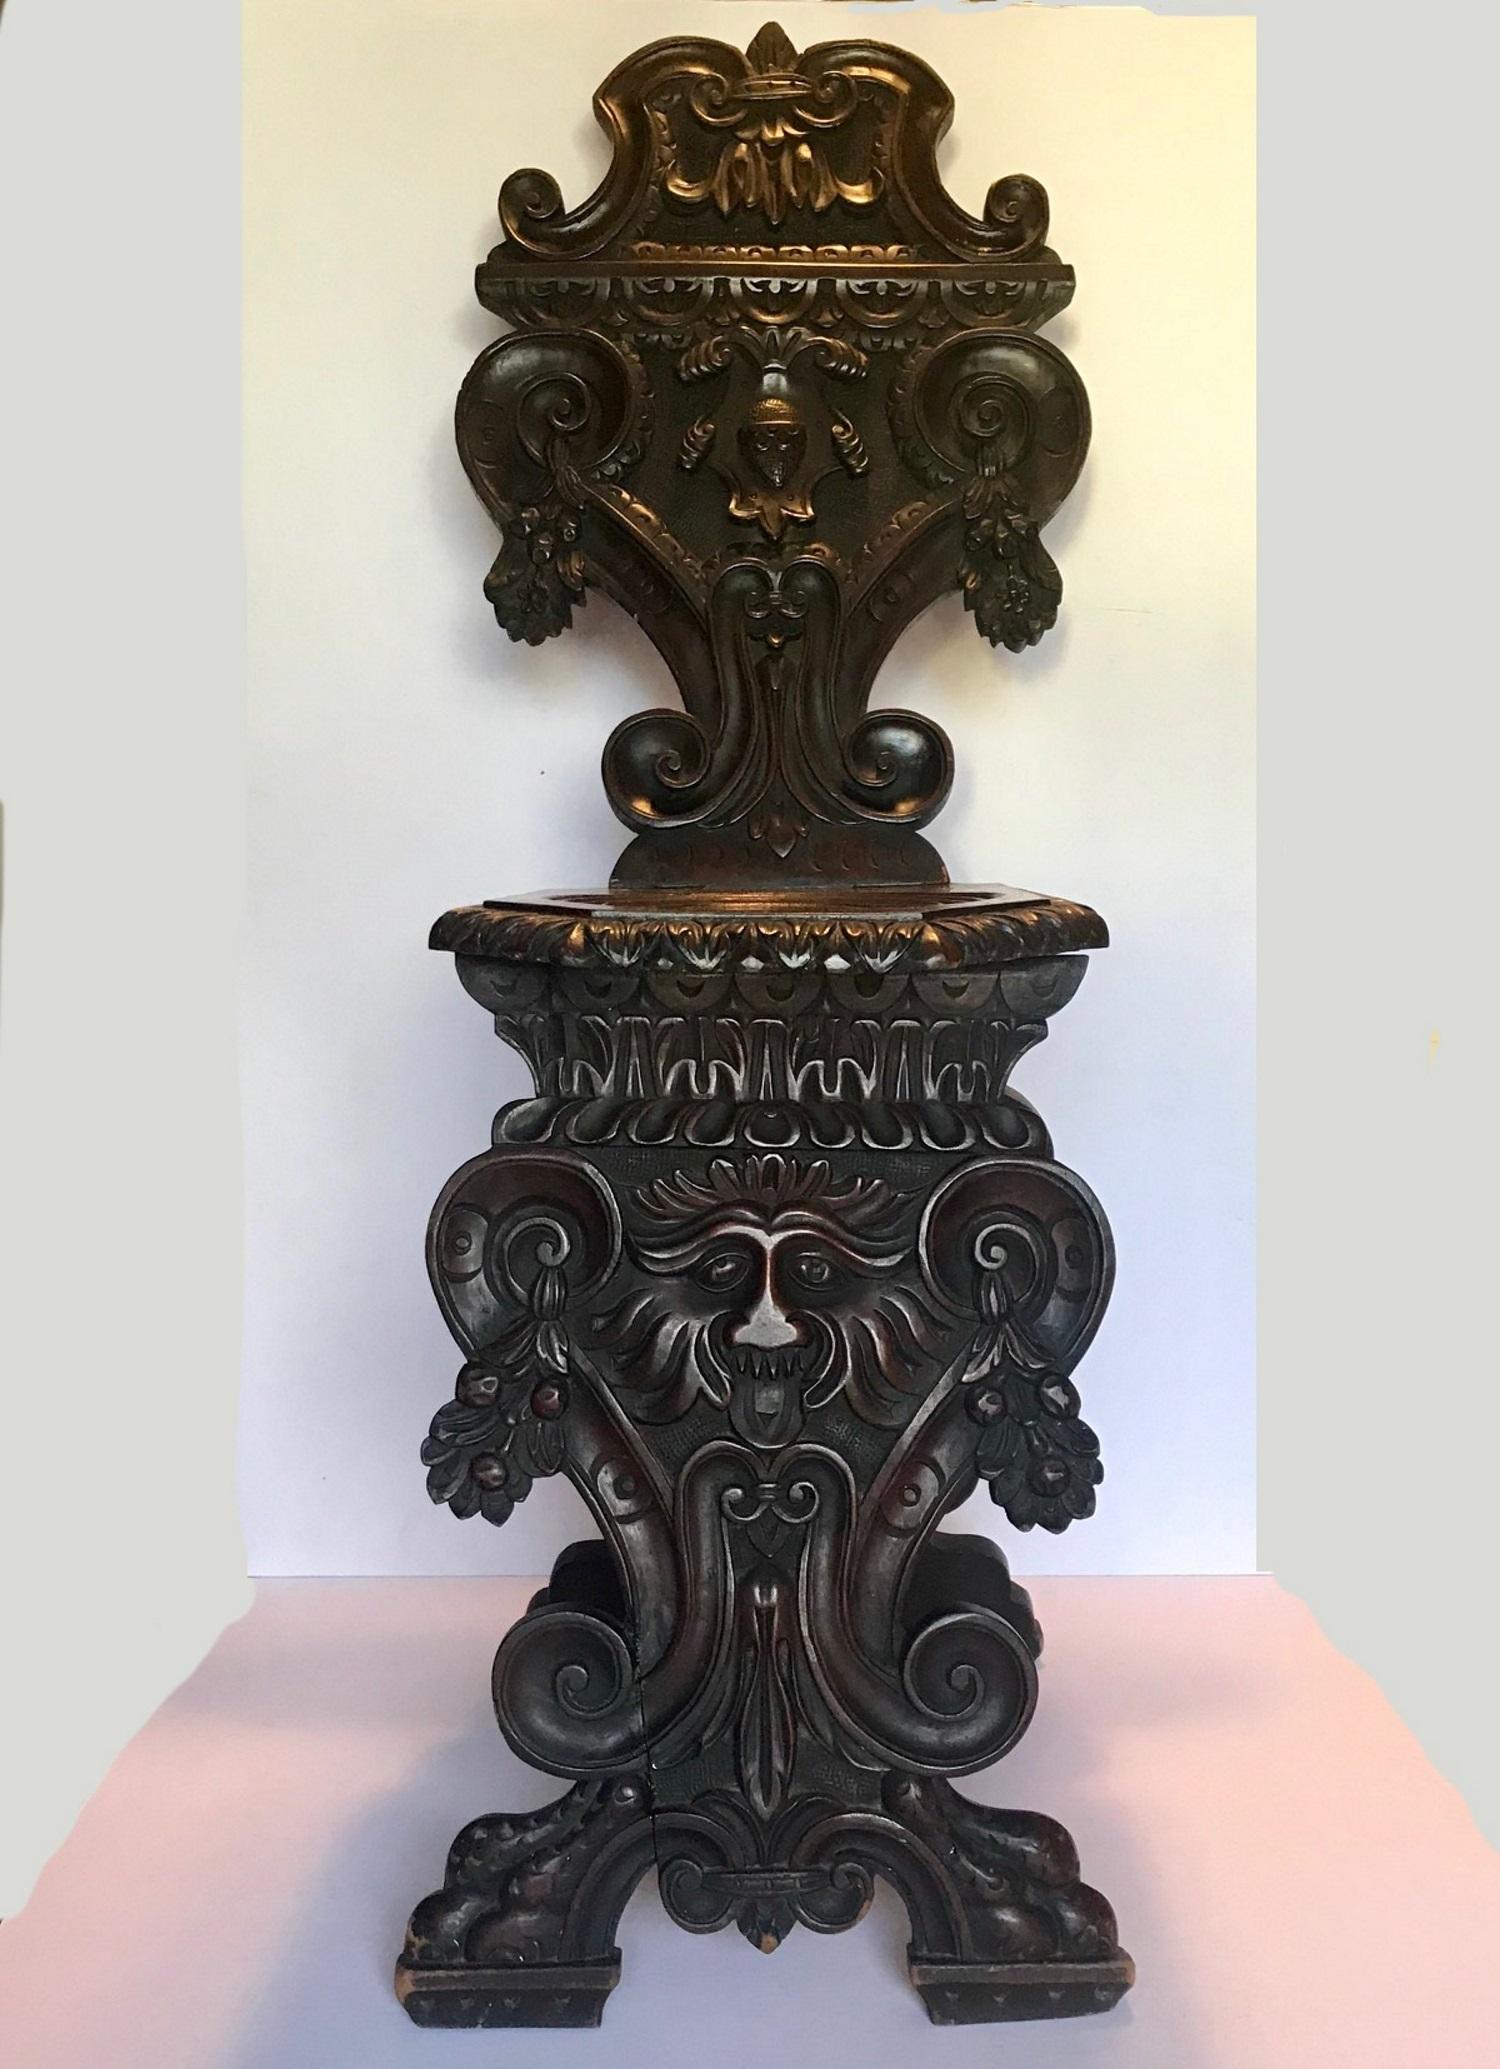 A fine Italian 19th century heavily carved Sgabello side chair. The entire front surface is hand carved and is beautifully sculpted. These hall chairs were placed against the wall and subsequently didn’t need to be decorated on the back. In the